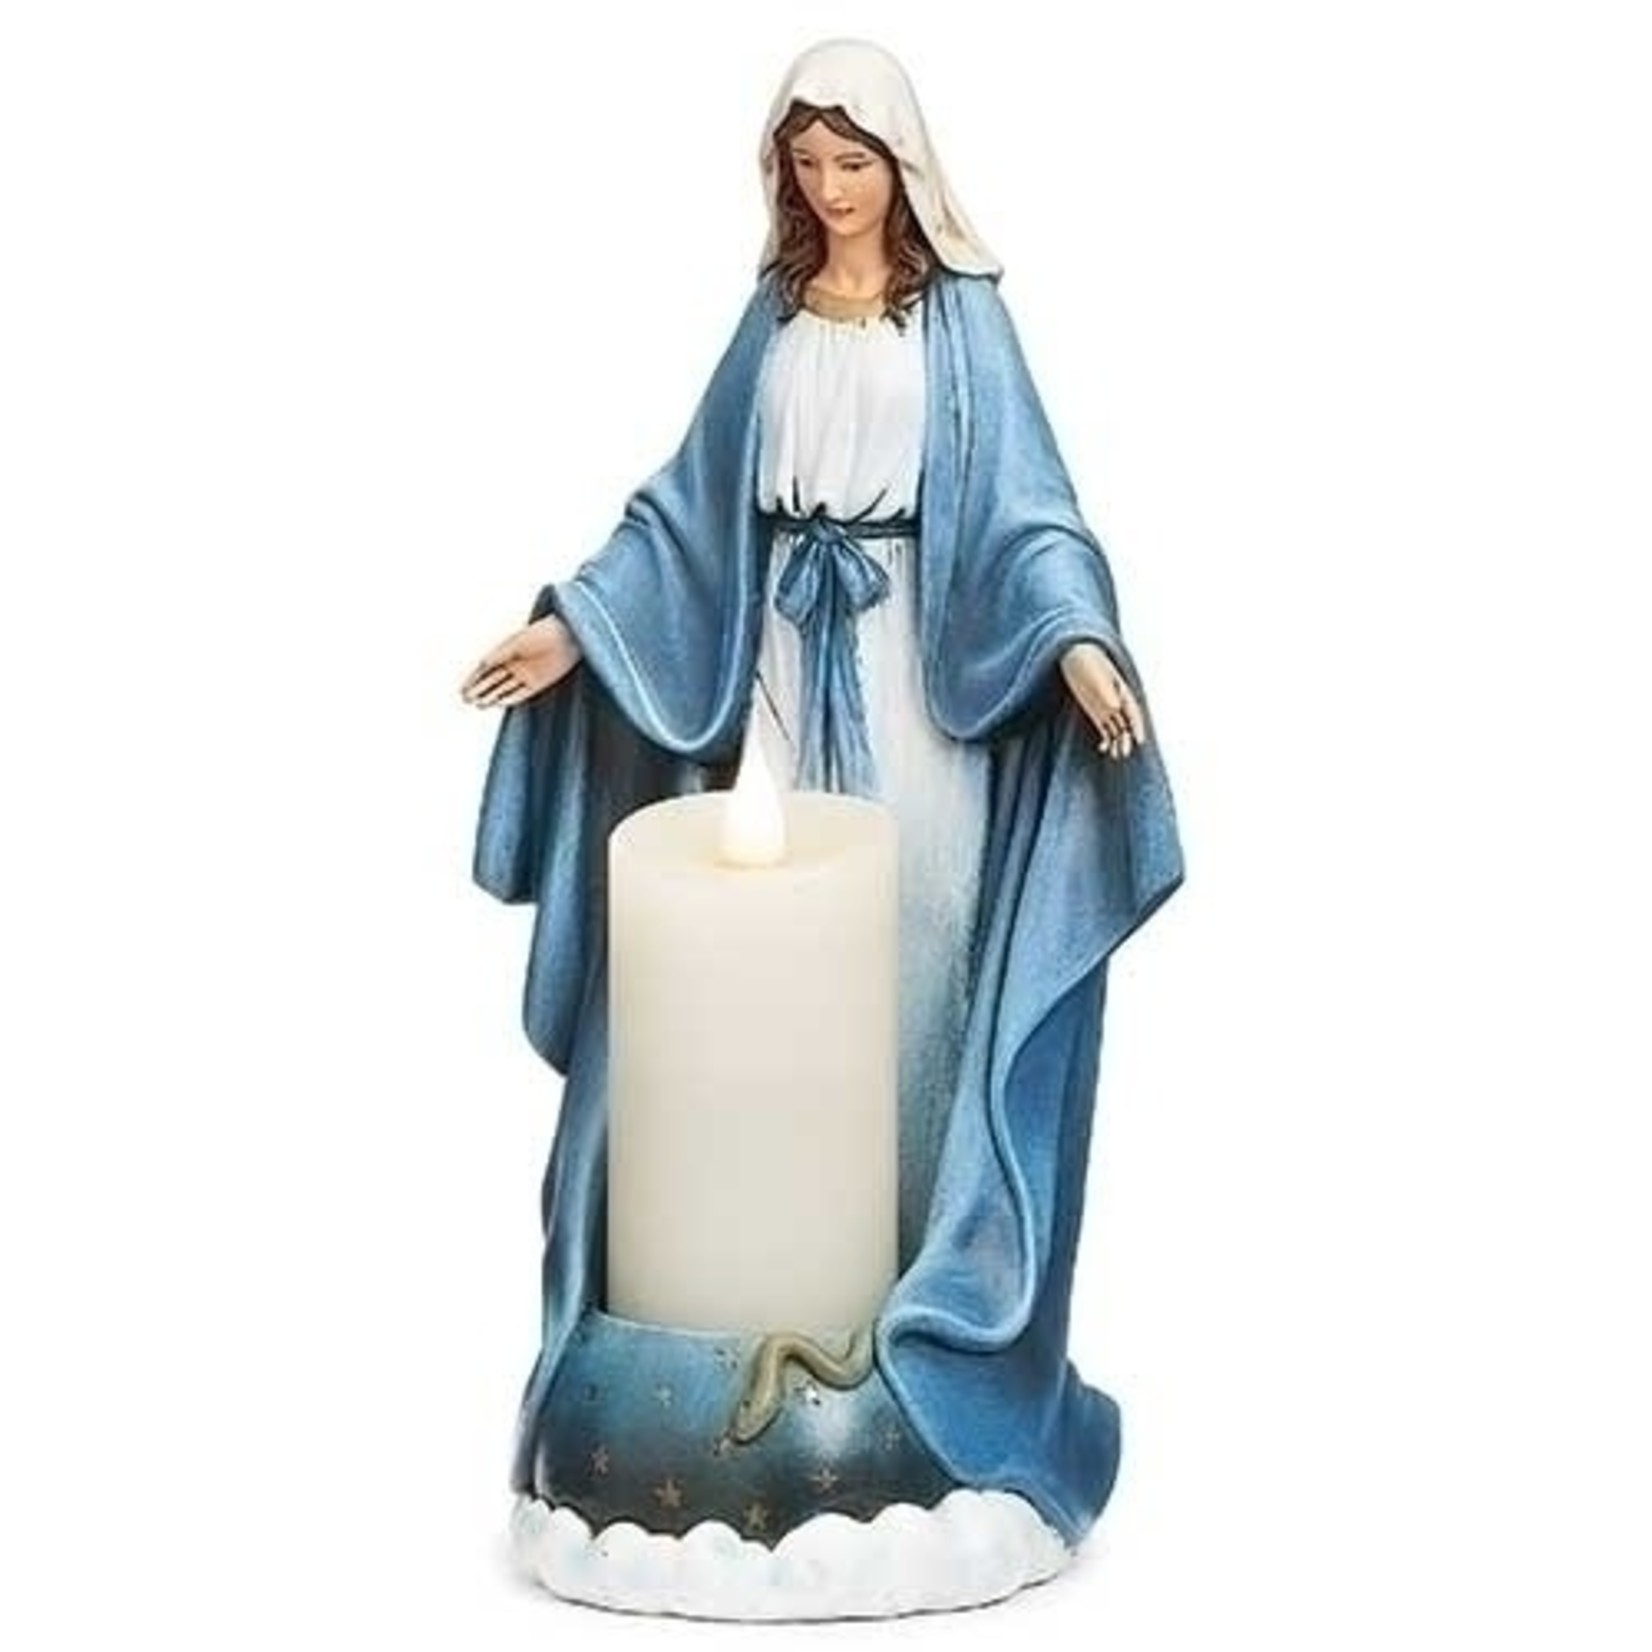 10"H OUR LADY OF GRACE FIGURE